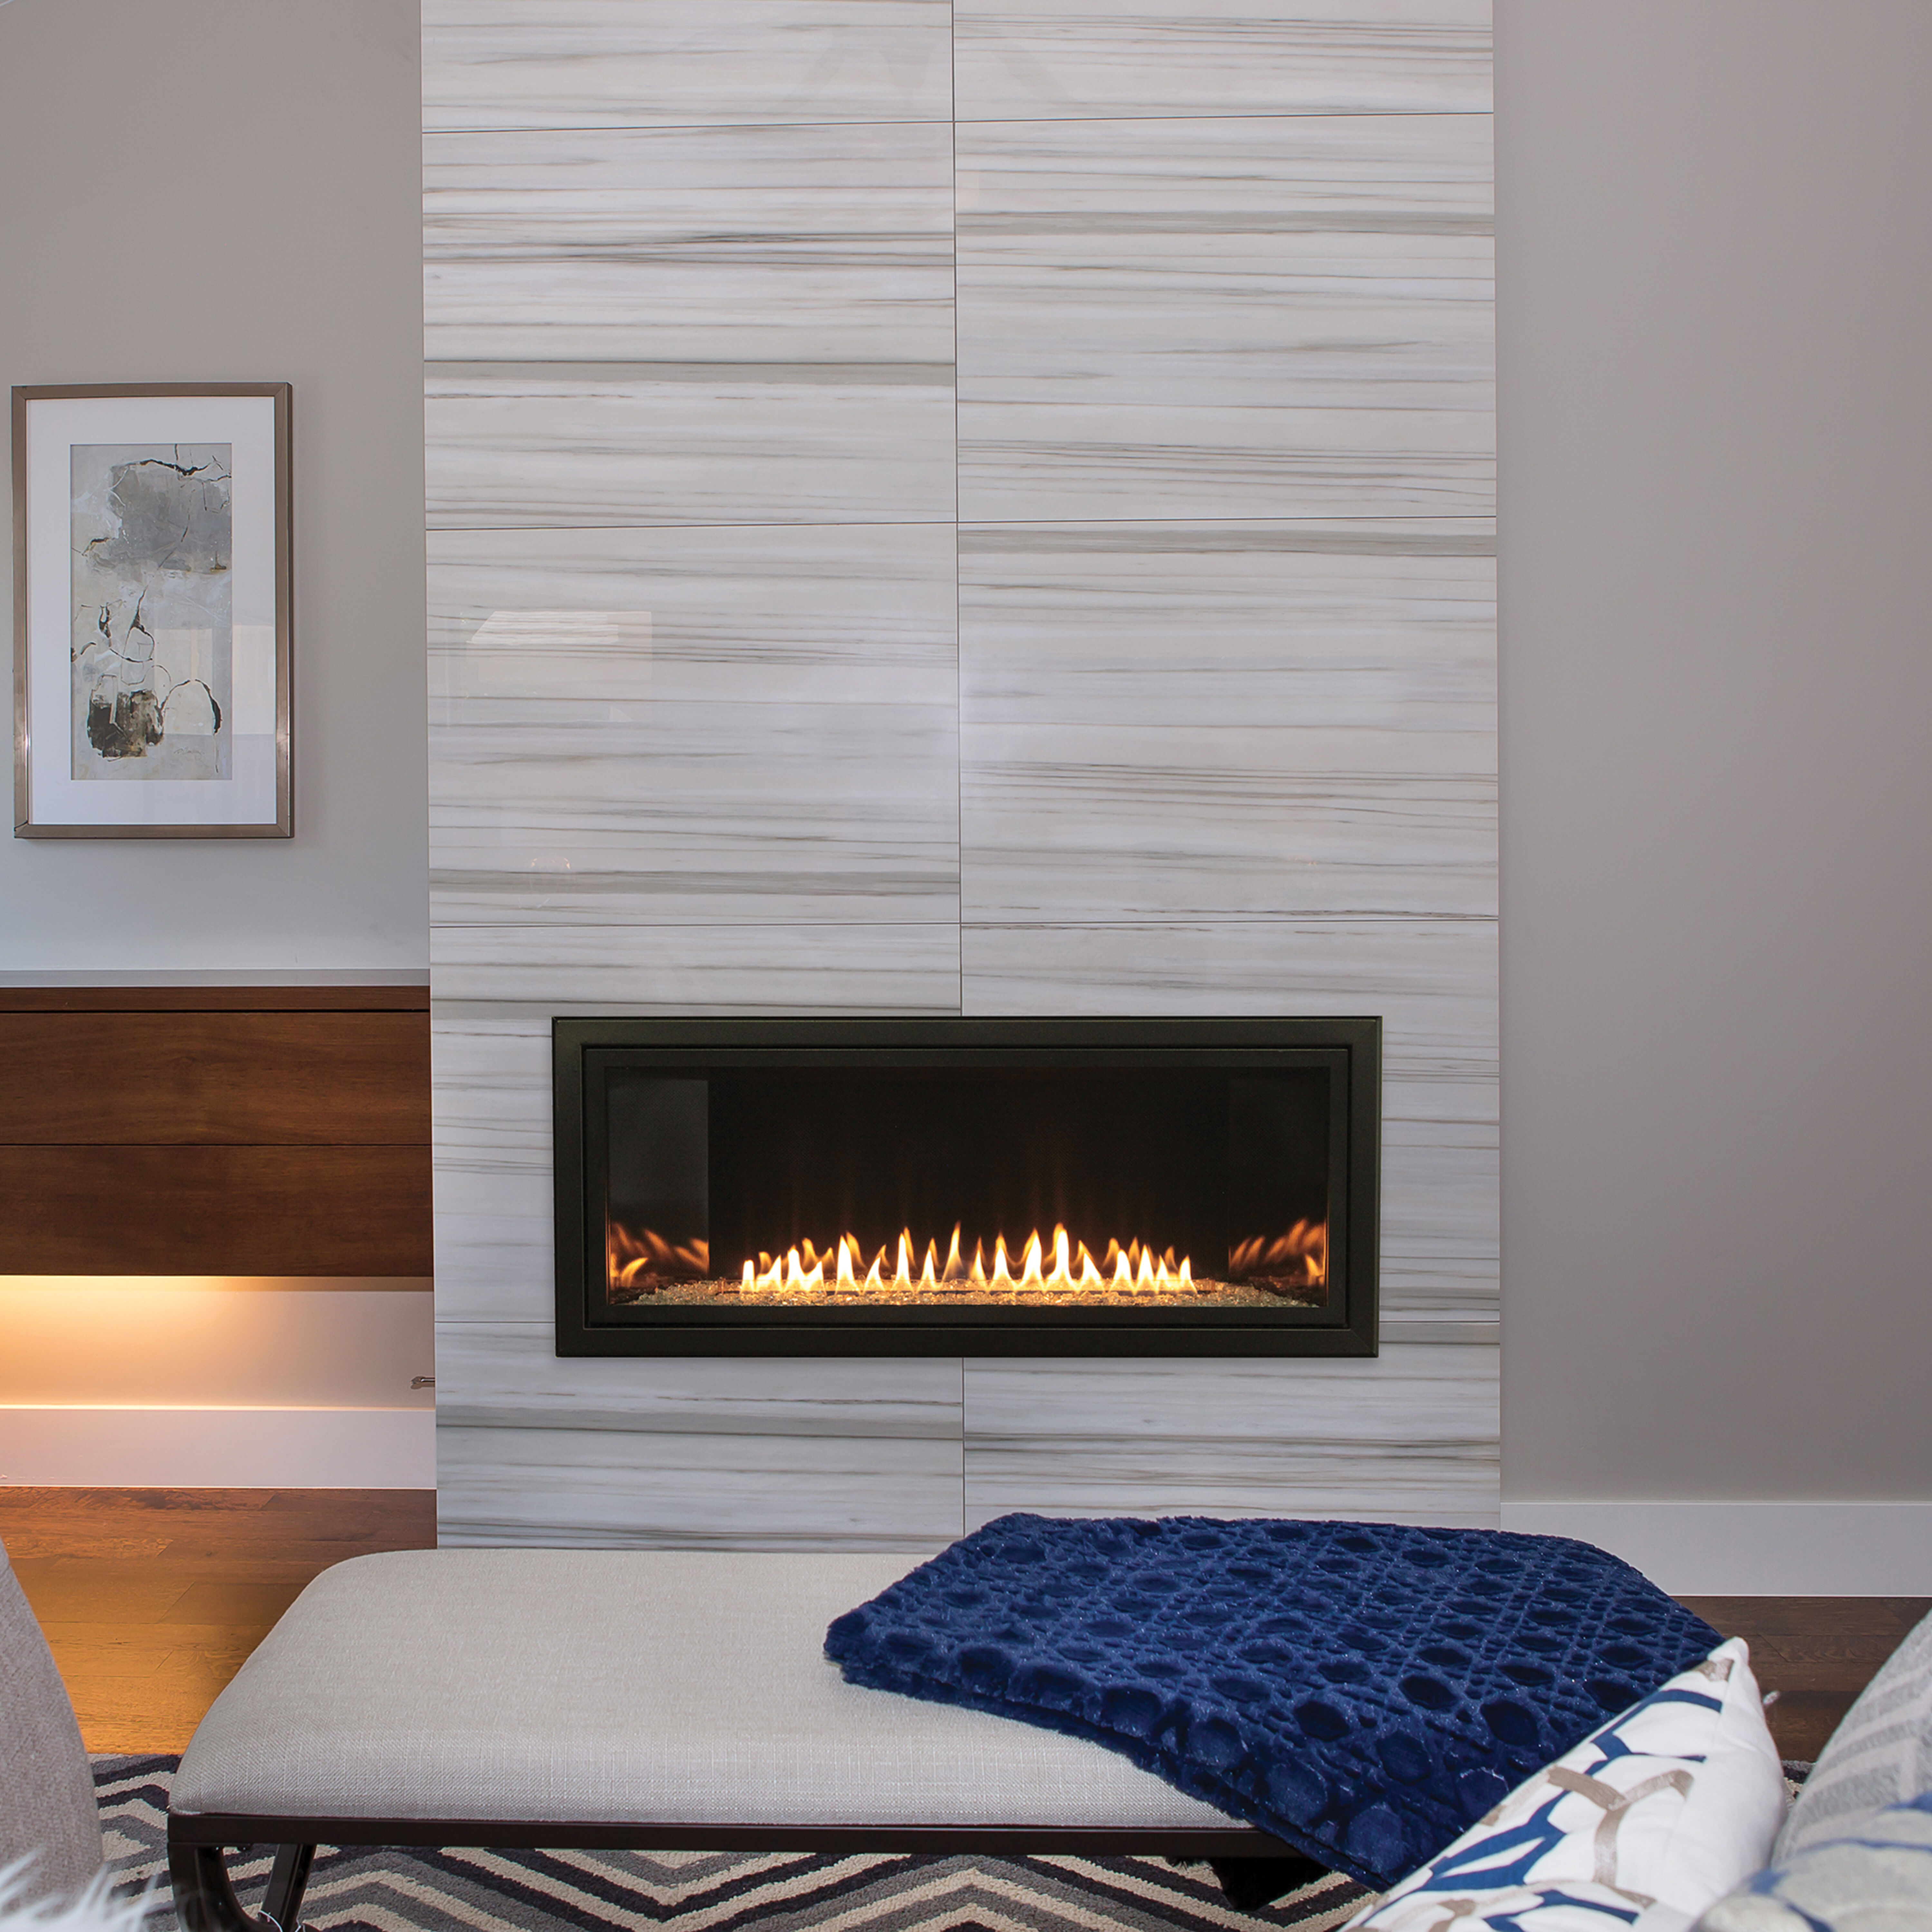 The Empire Contemporary Boulevard Ventless Gas Fireplace installed on a white, textured wall with a grey, geometric rug, a white ottoman and a blue accent blanket.